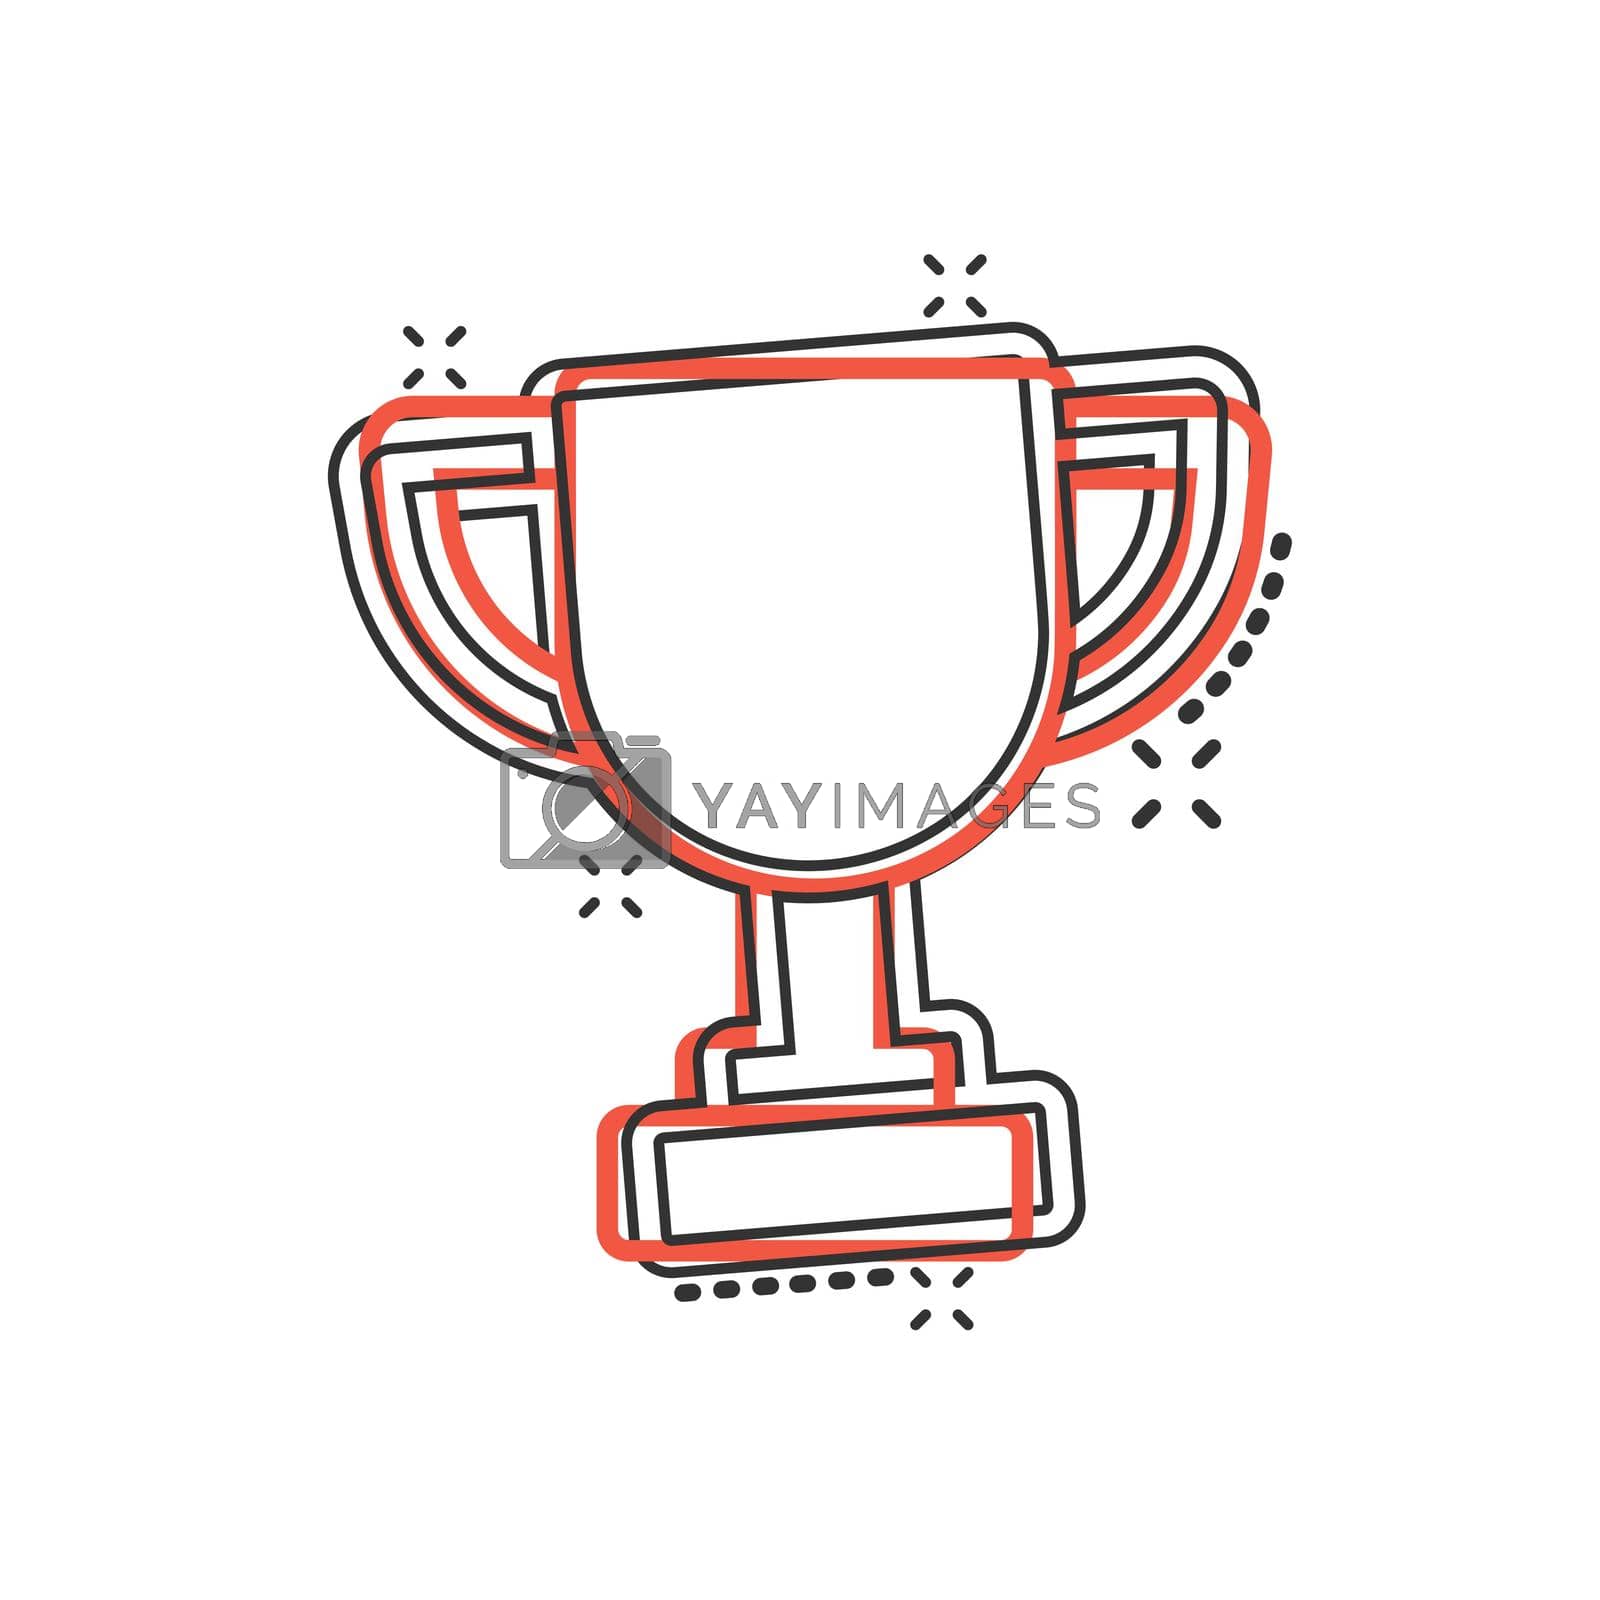 Royalty free image of Trophy cup icon in comic style. Goblet prize cartoon vector illustration on isolated background. Award splash effect sign business concept. by LysenkoA